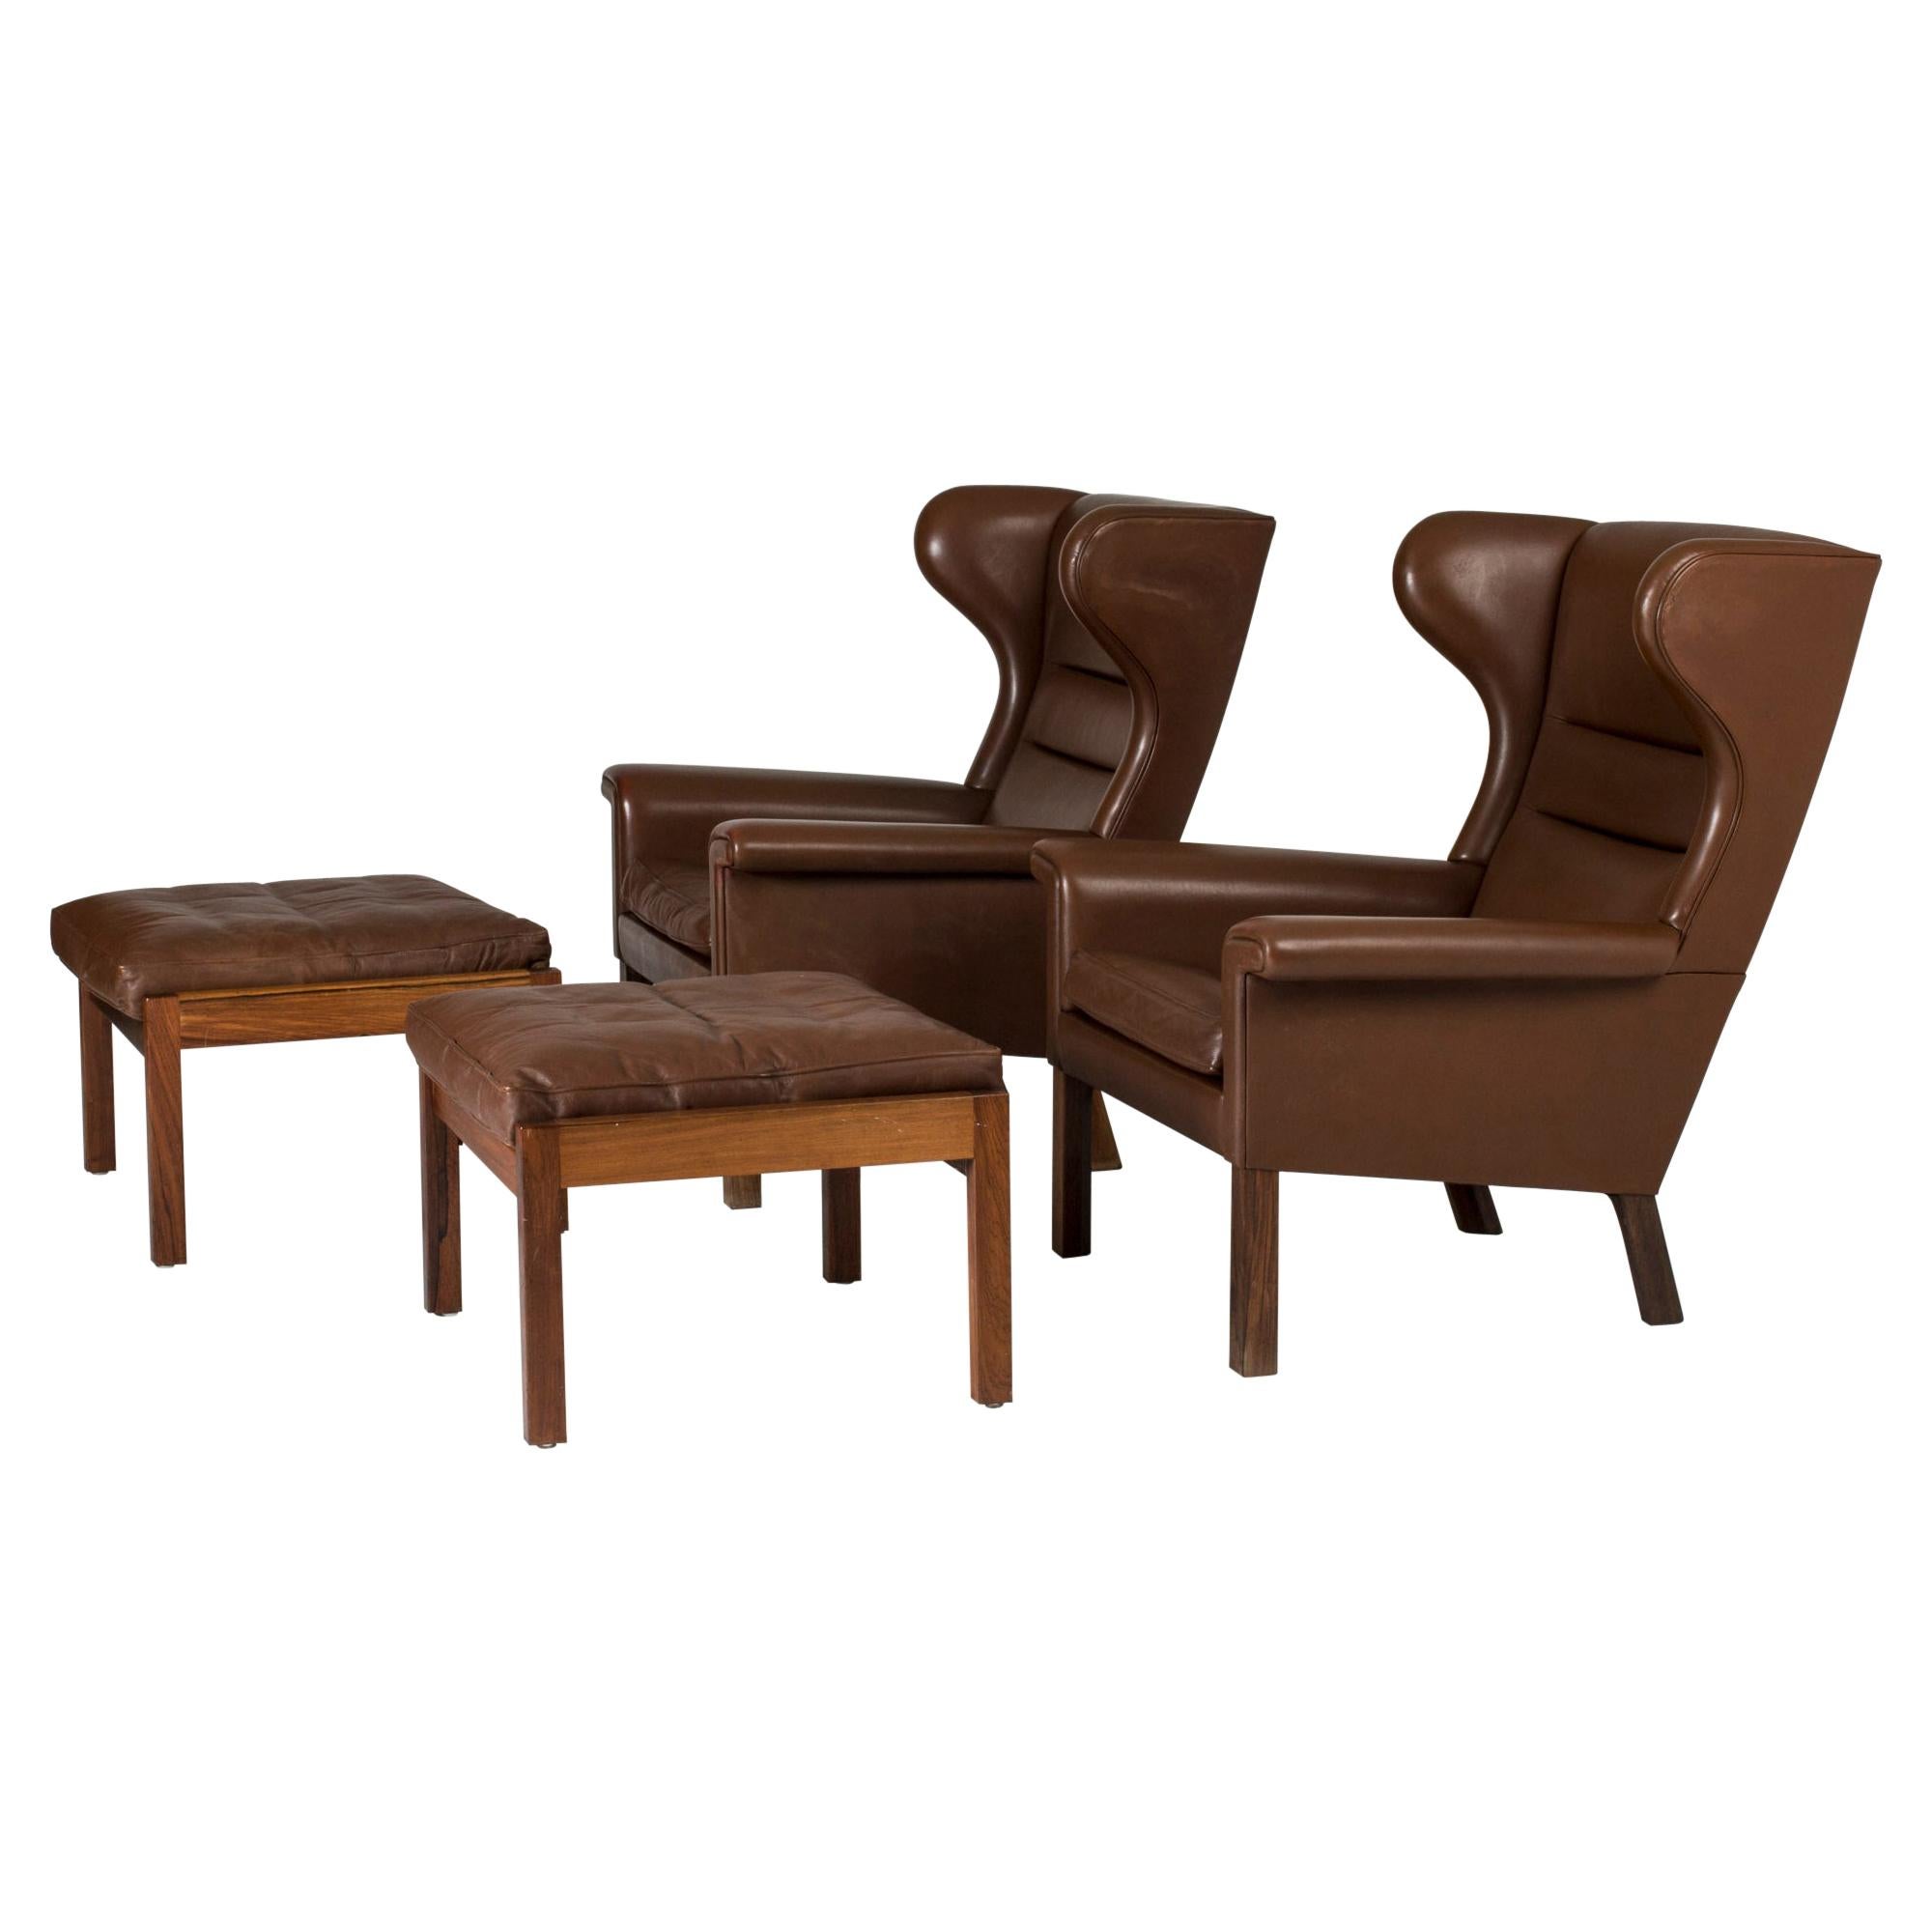 Pair of Leather Lounge Chairs by Hans J. Wegner for AP Stolen